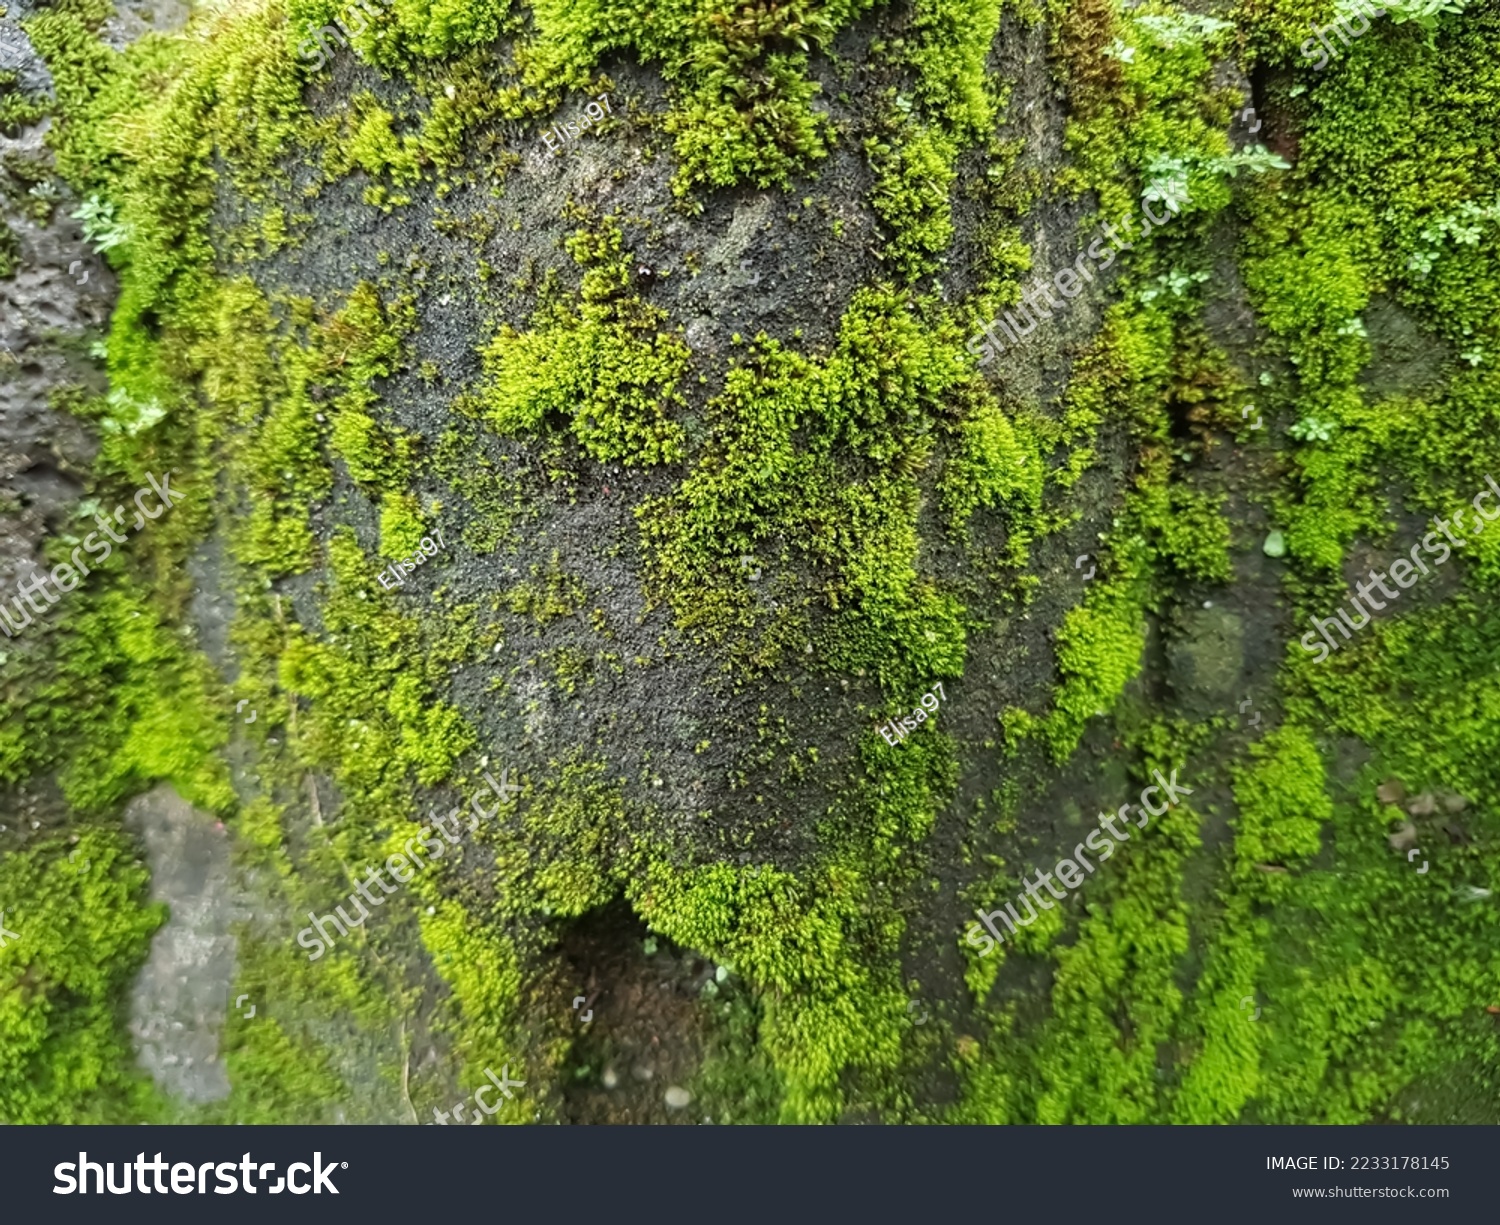 Bryophyta sensu stricto or Musci. "Moss" plants generally refer to this group. These are non-vascular and spore-forming plants. #2233178145